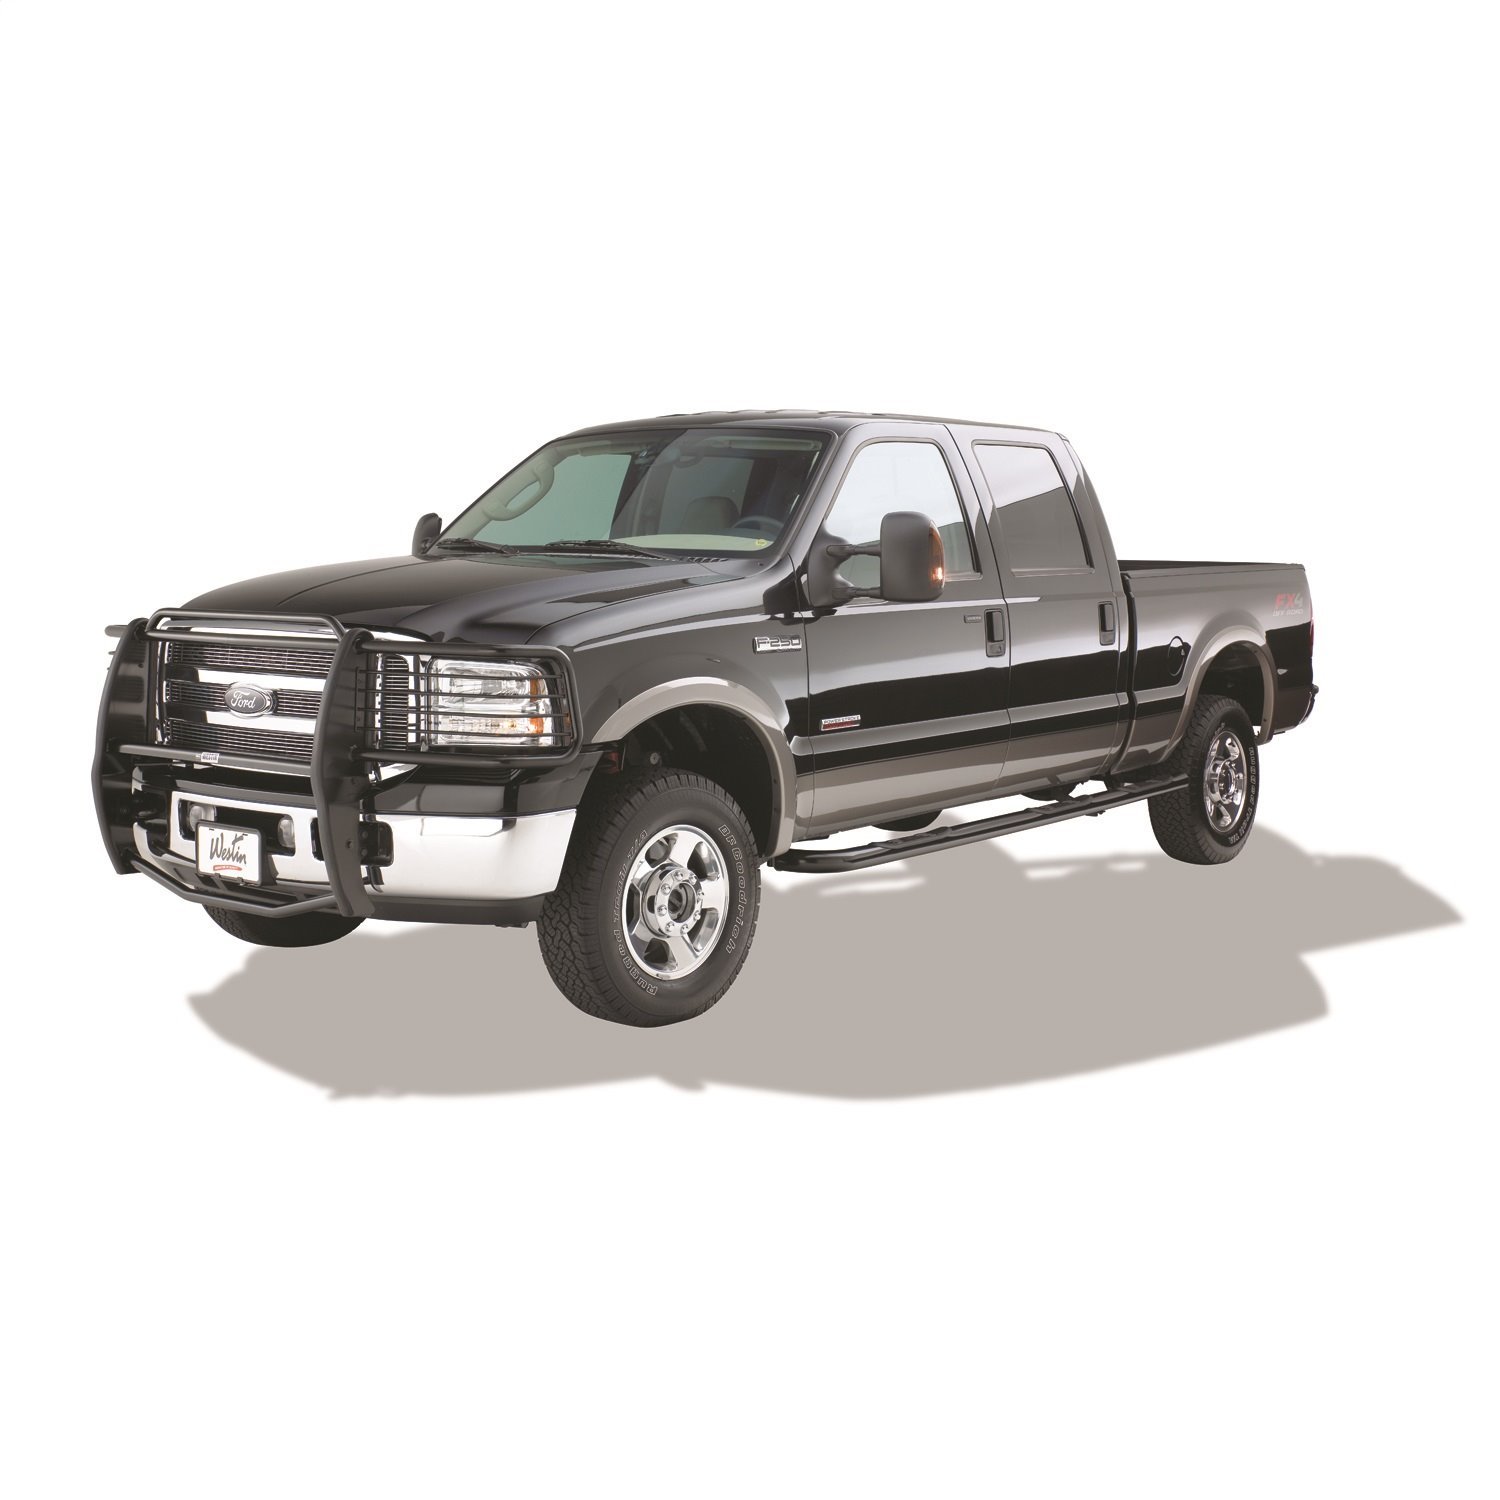 Sportsman Grille Guard 2005-07 Ford F-Series Super Duty